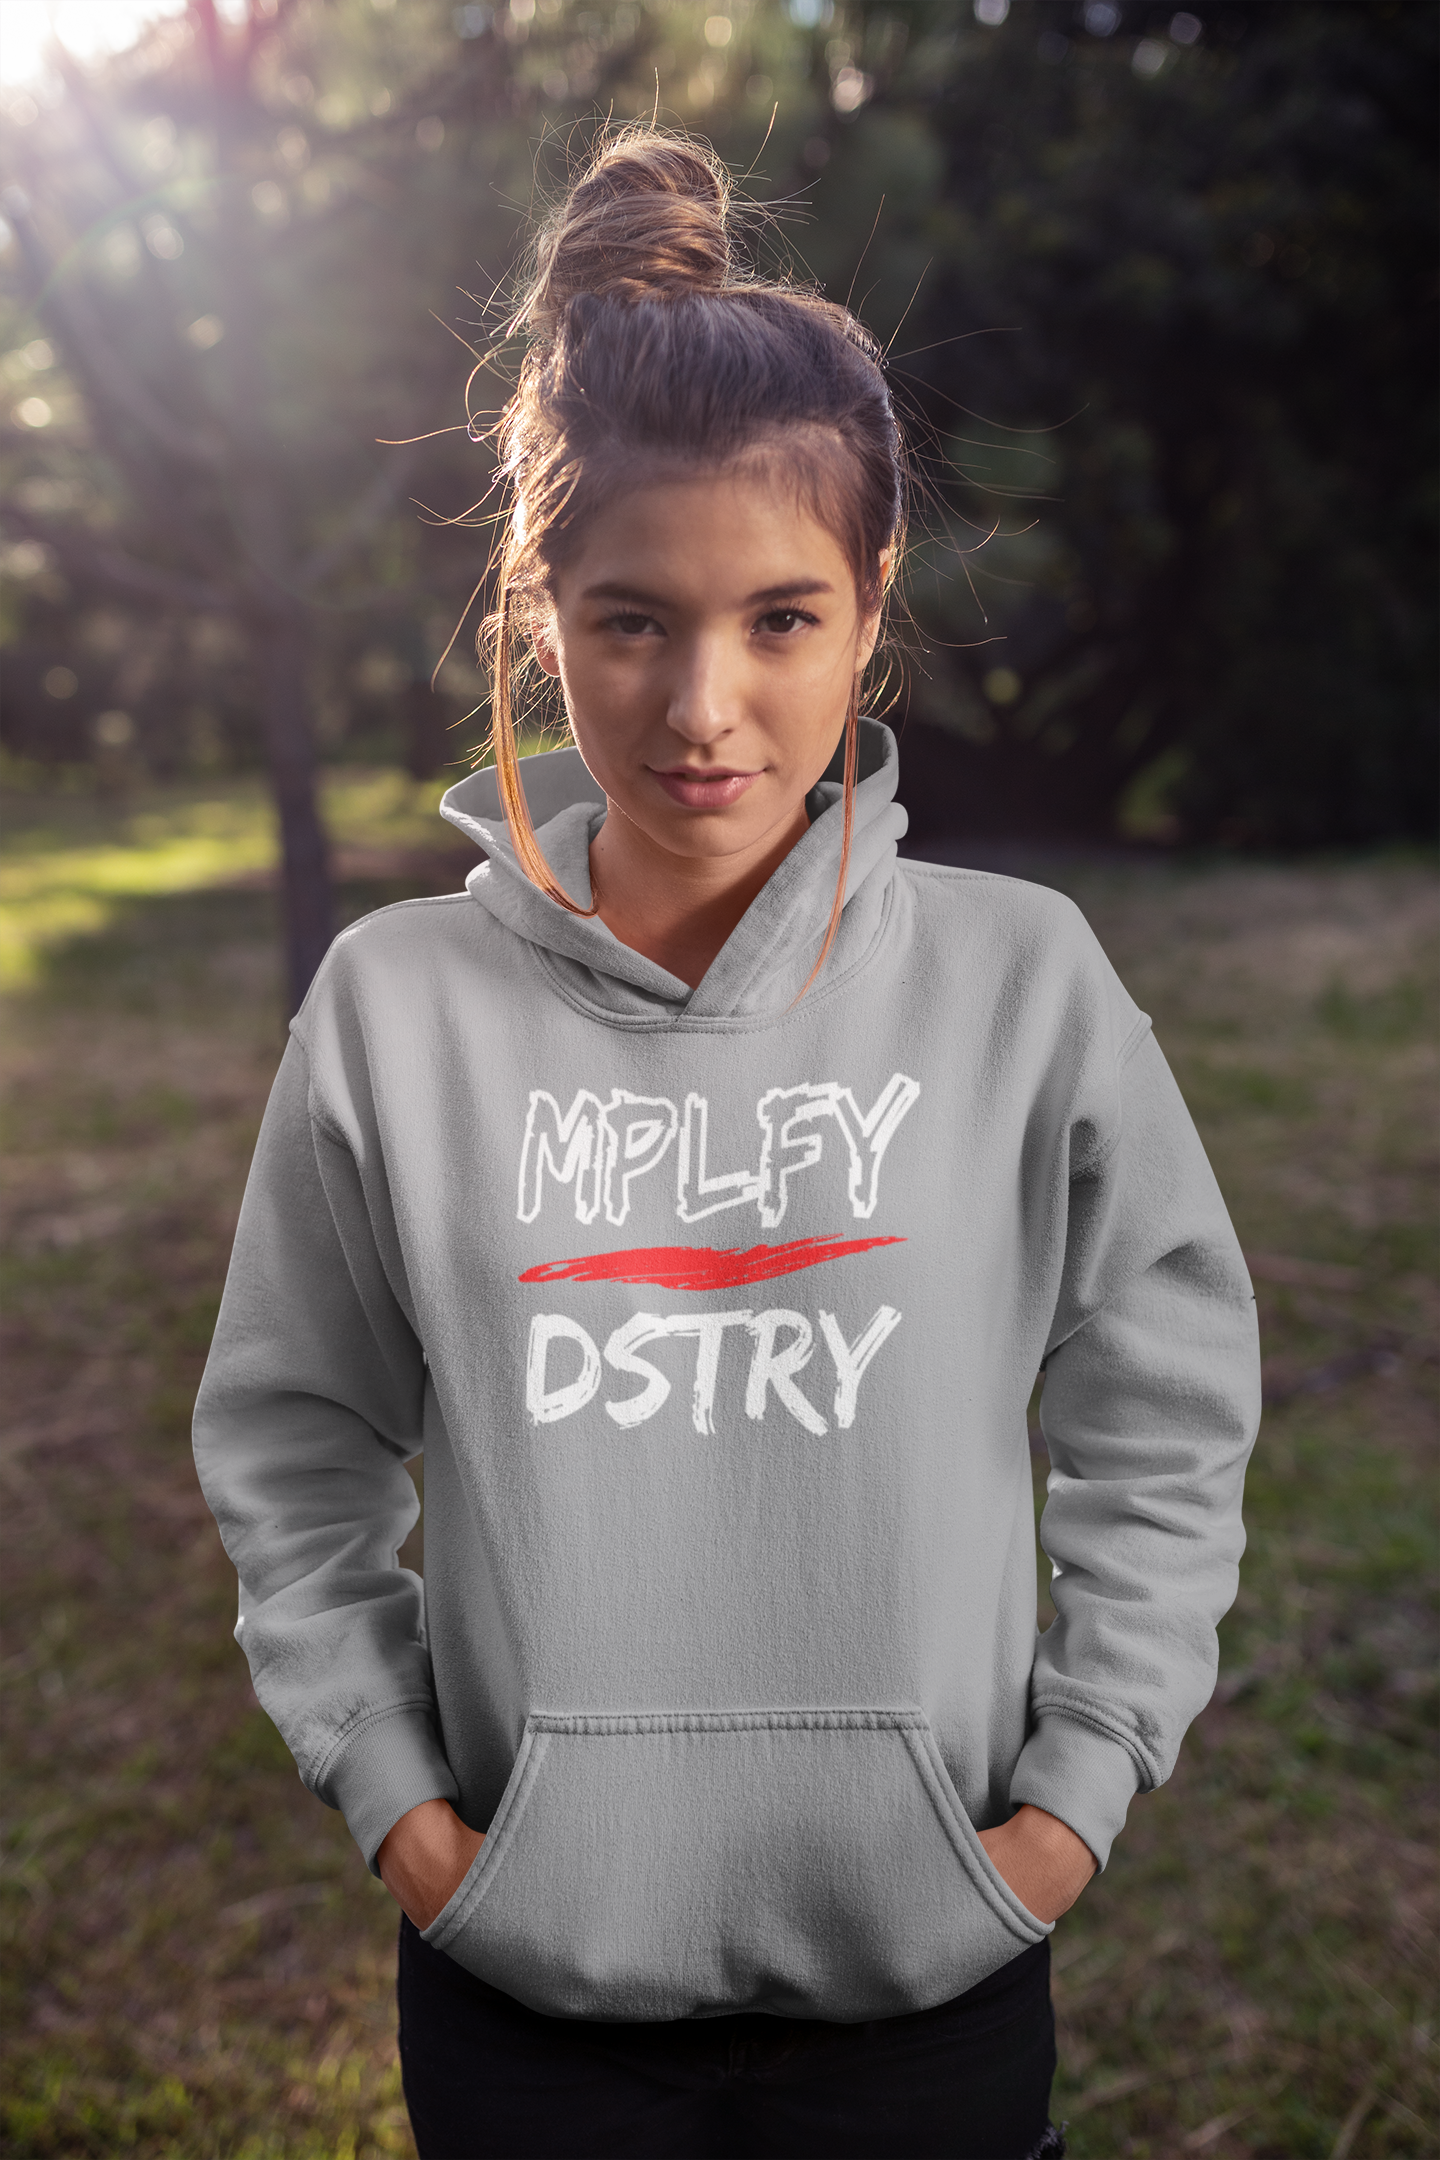 SELF TITLED Classic Fit AmplifyDestroy Hoodie